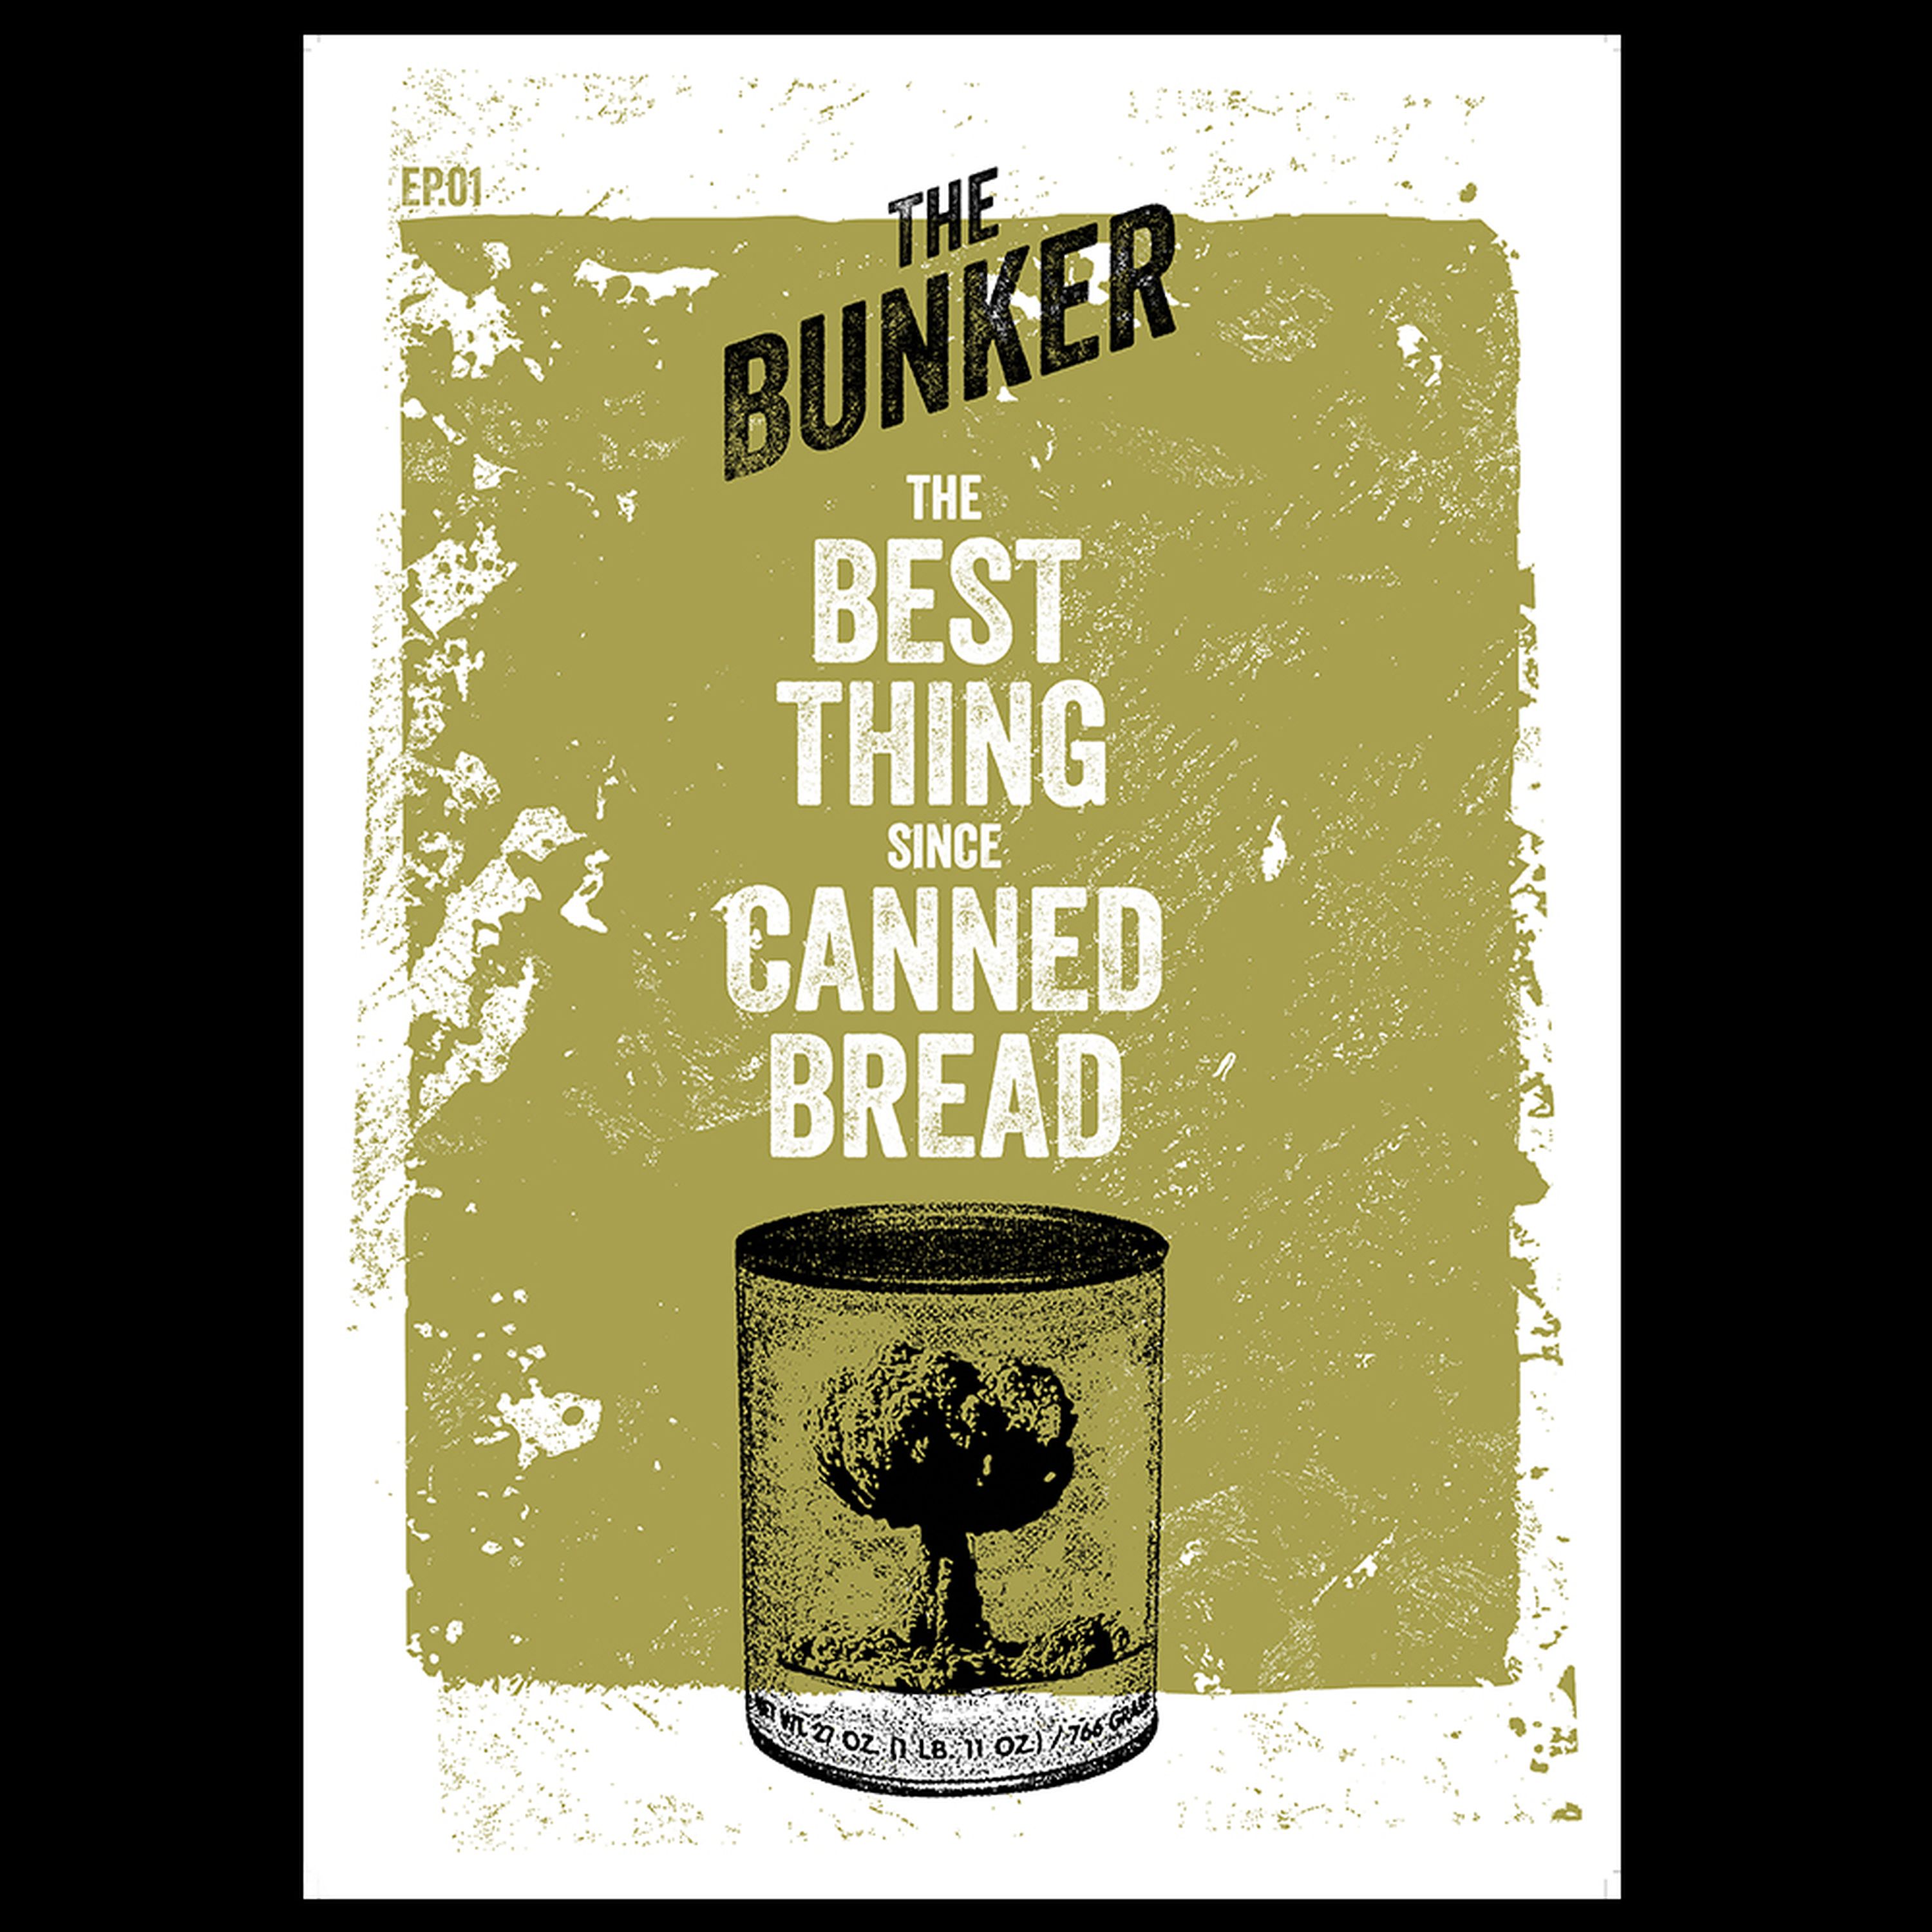 Episode One – The Best Thing Since Canned Bread